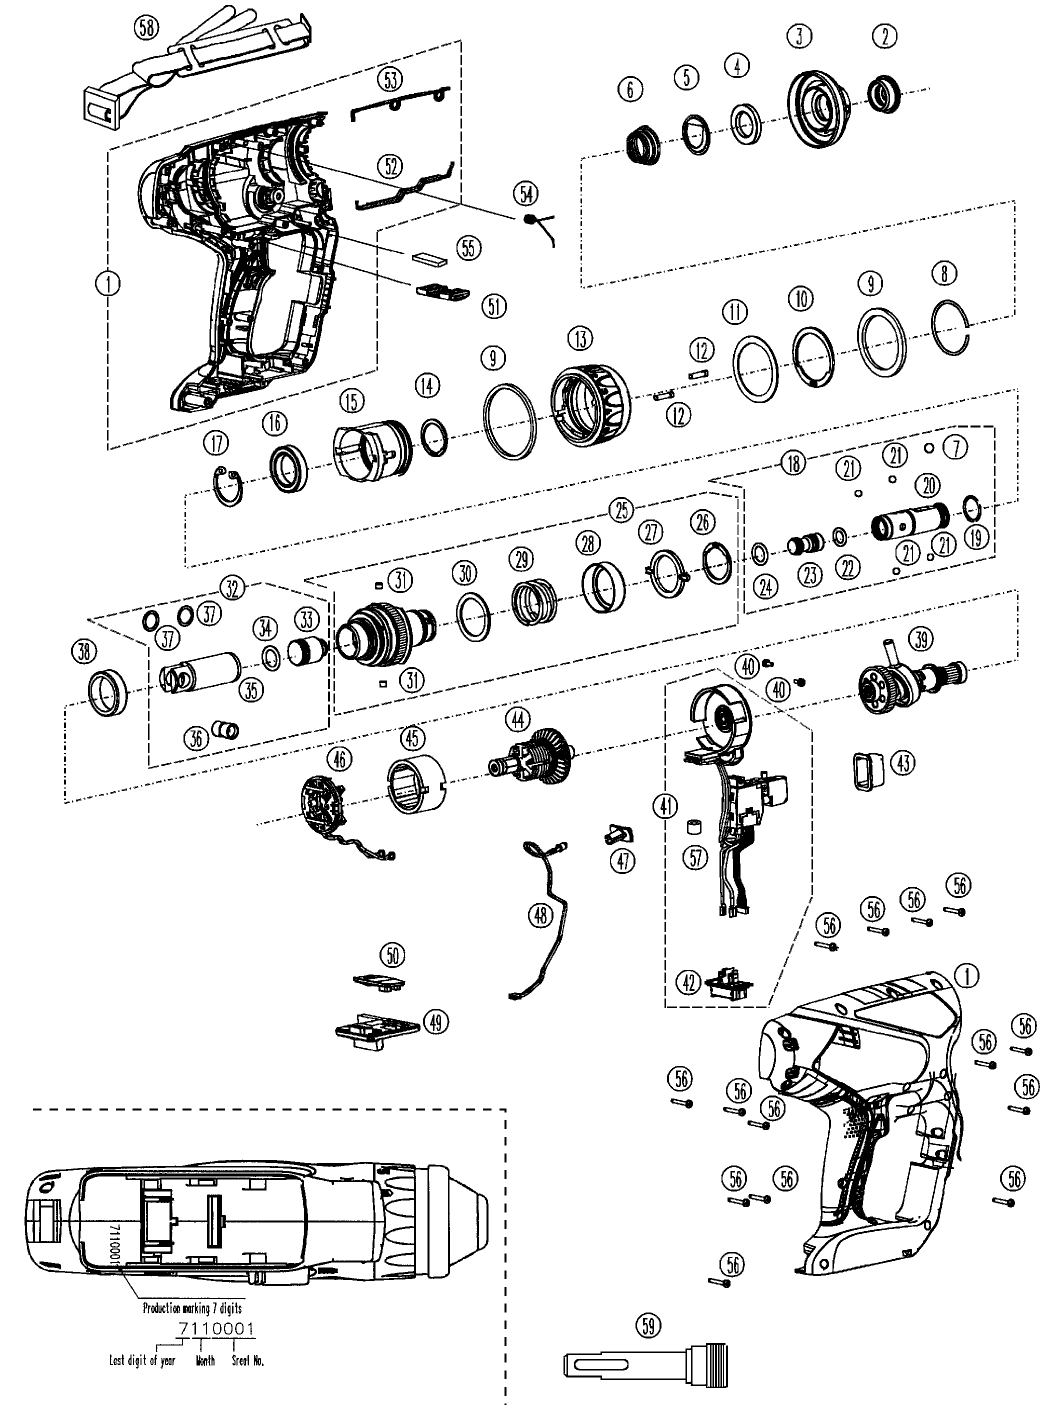 EY7840: Exploded View